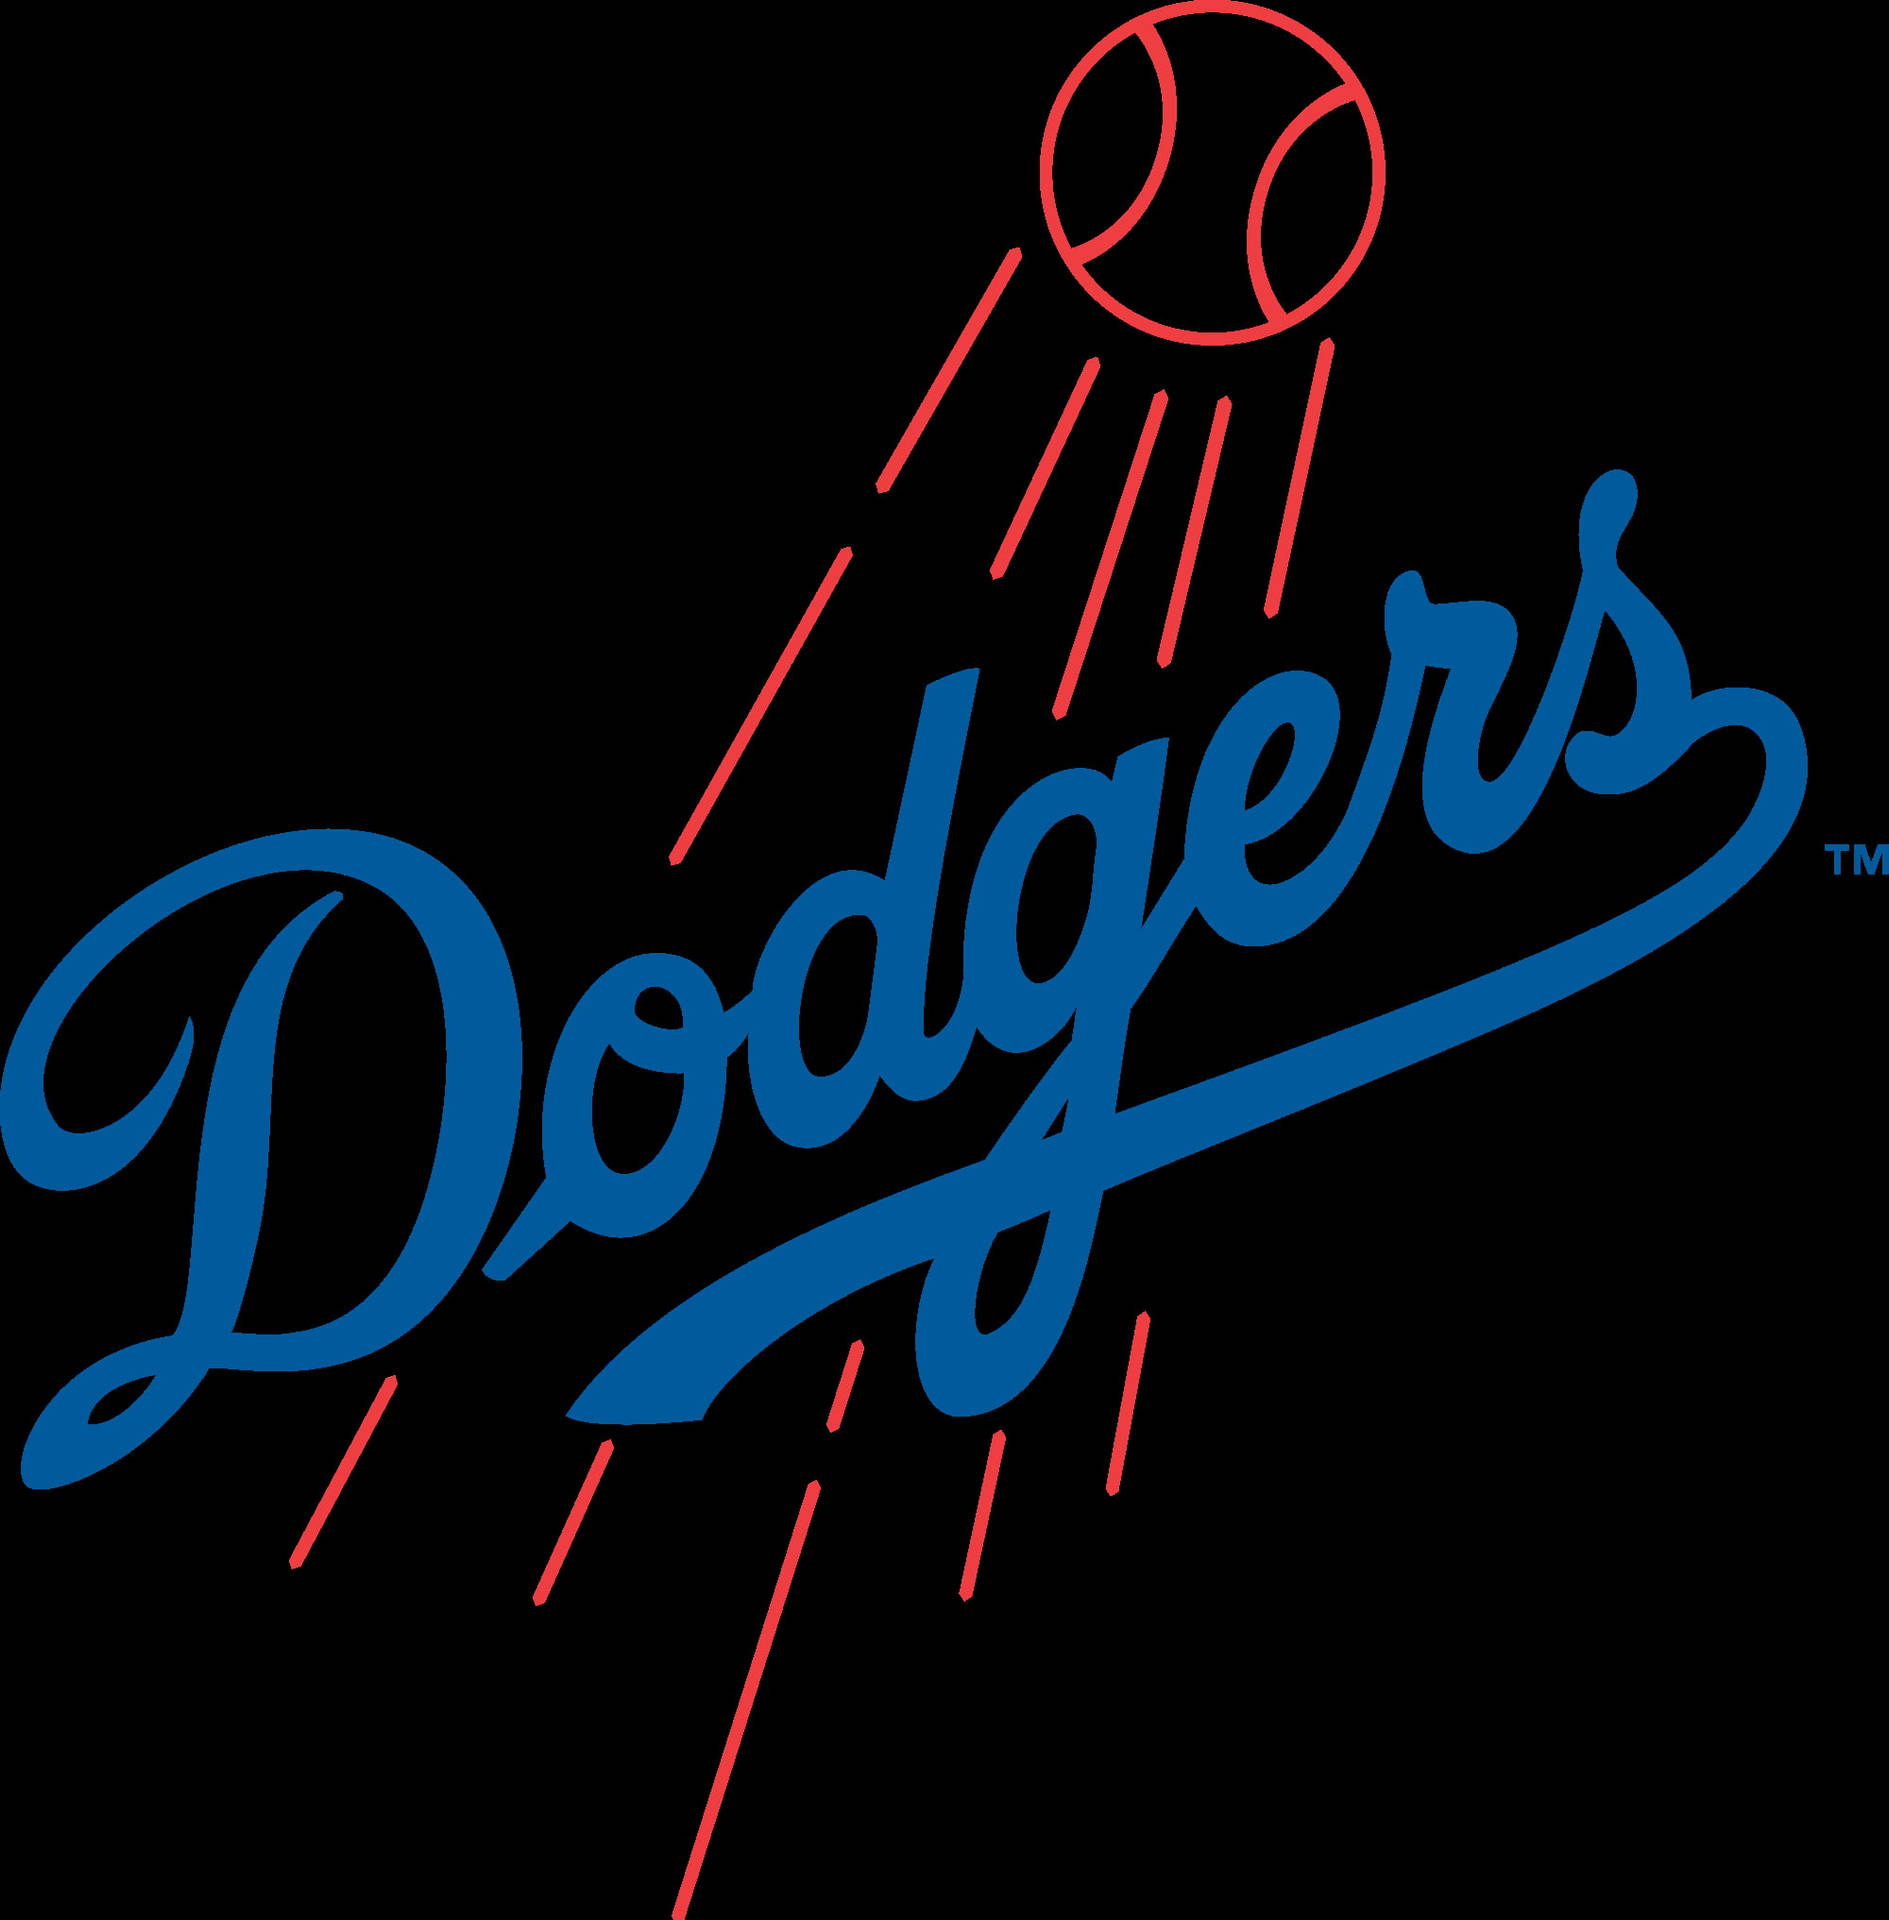 Los Angeles Dodgers Luminous Red Ball